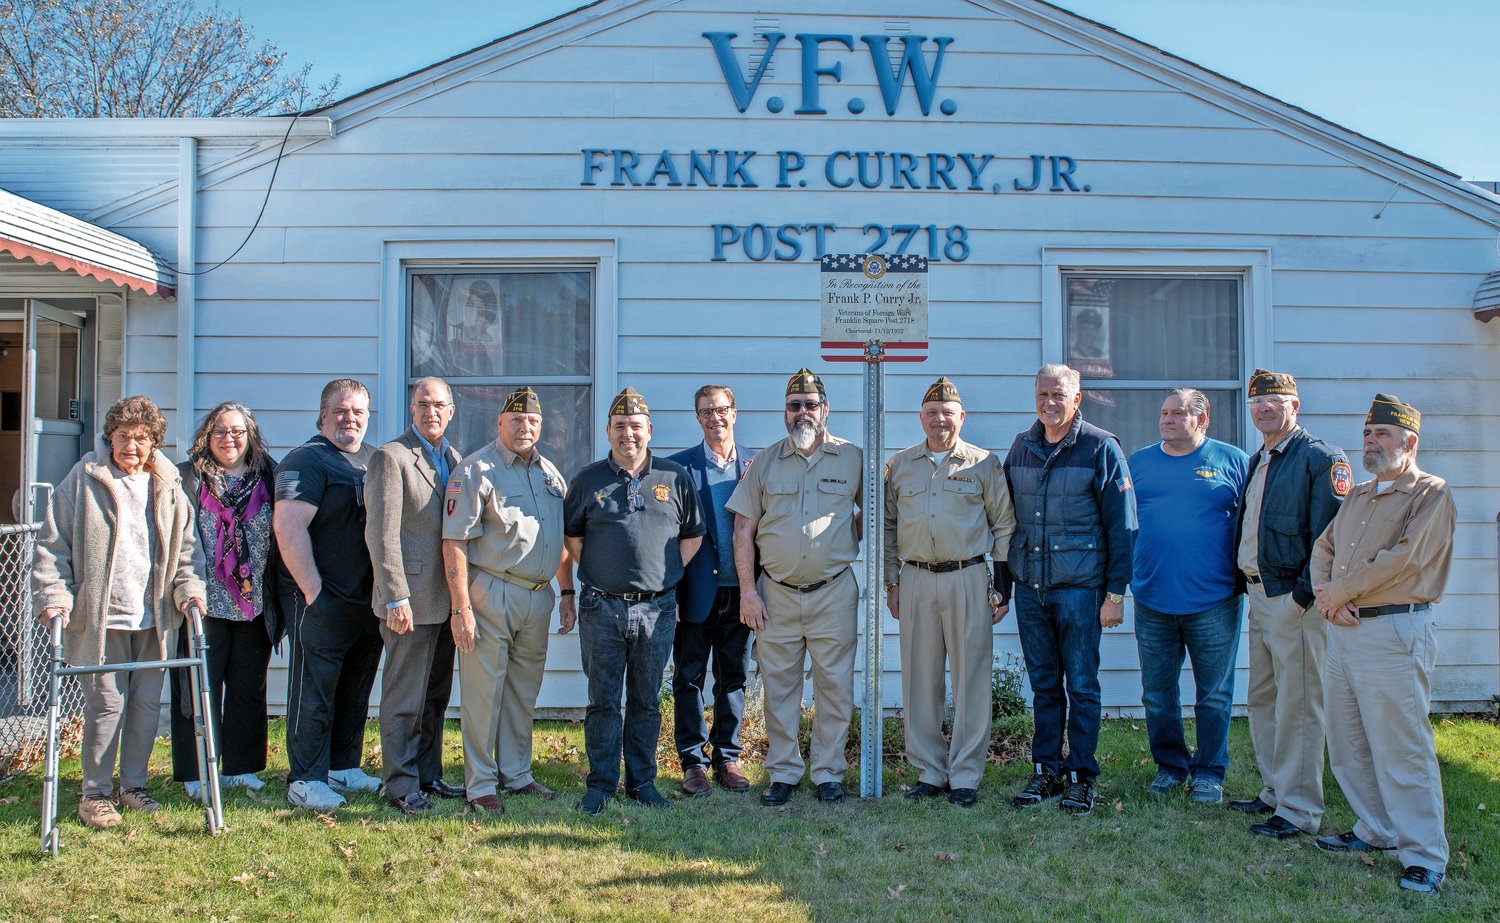 Franklin Square Vfw Post Recognized Herald Community Newspapers